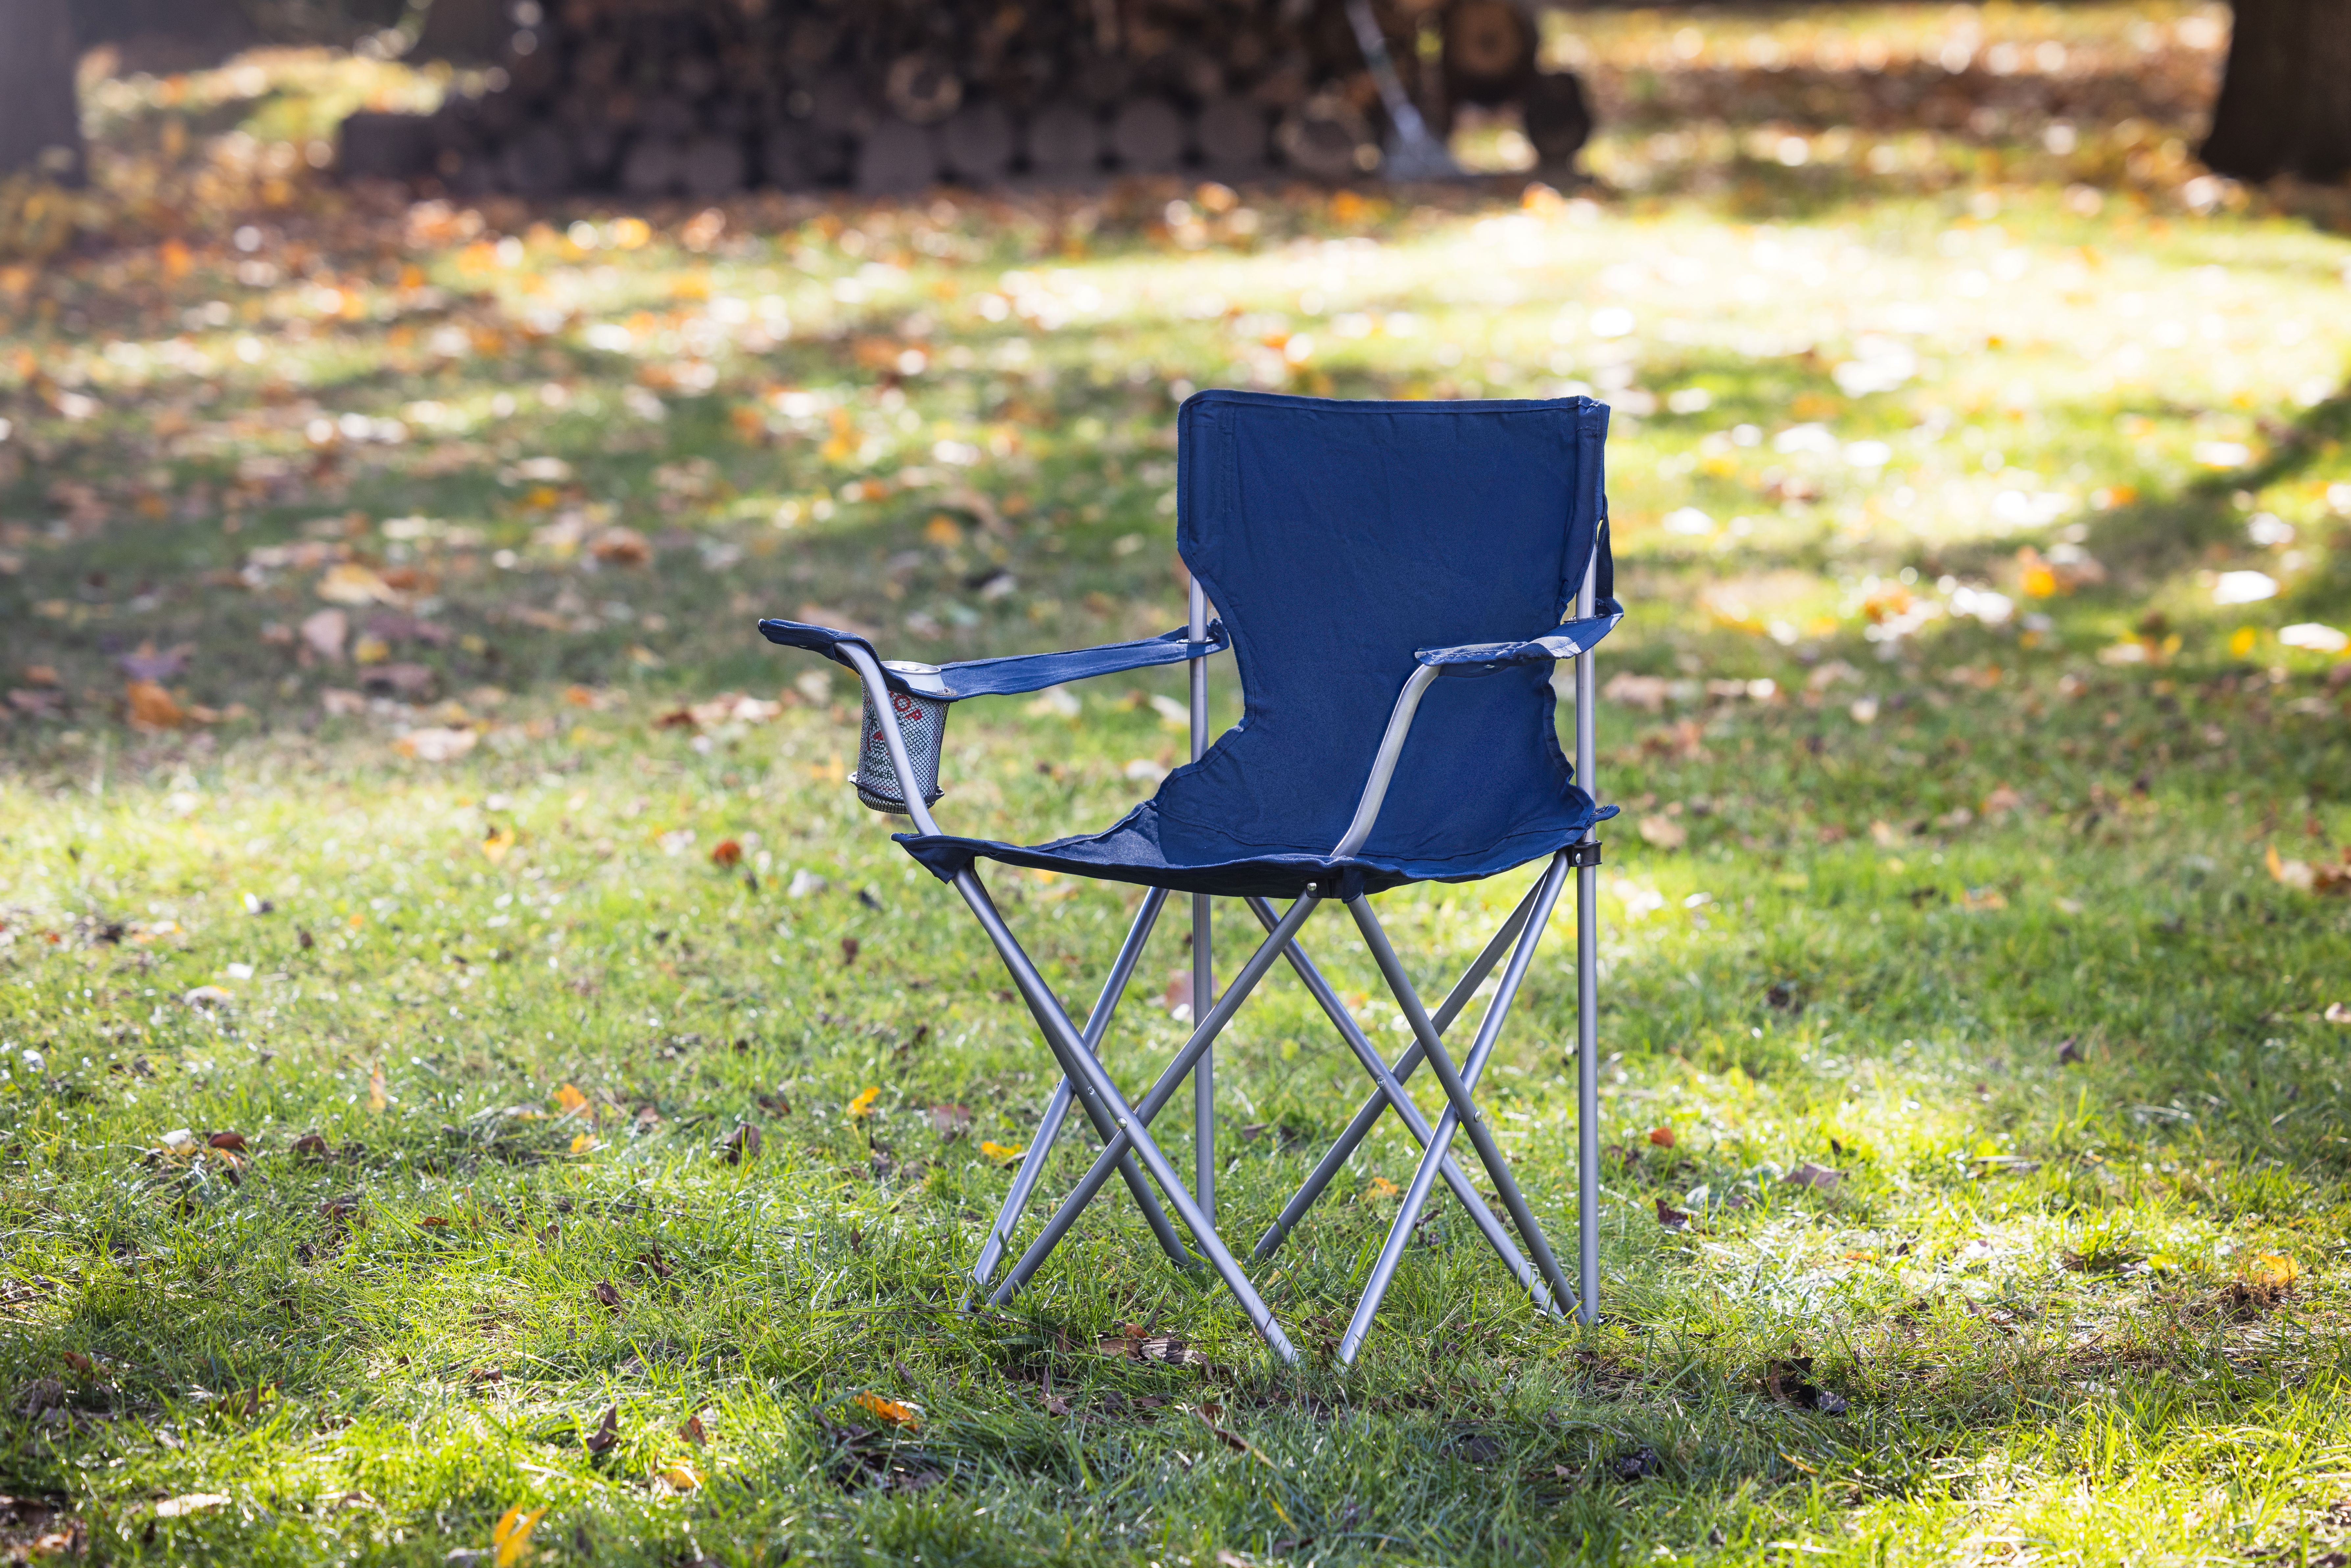 Ozark Trail Camping Chair, Blue, 4 and Half Pounds - image 11 of 13